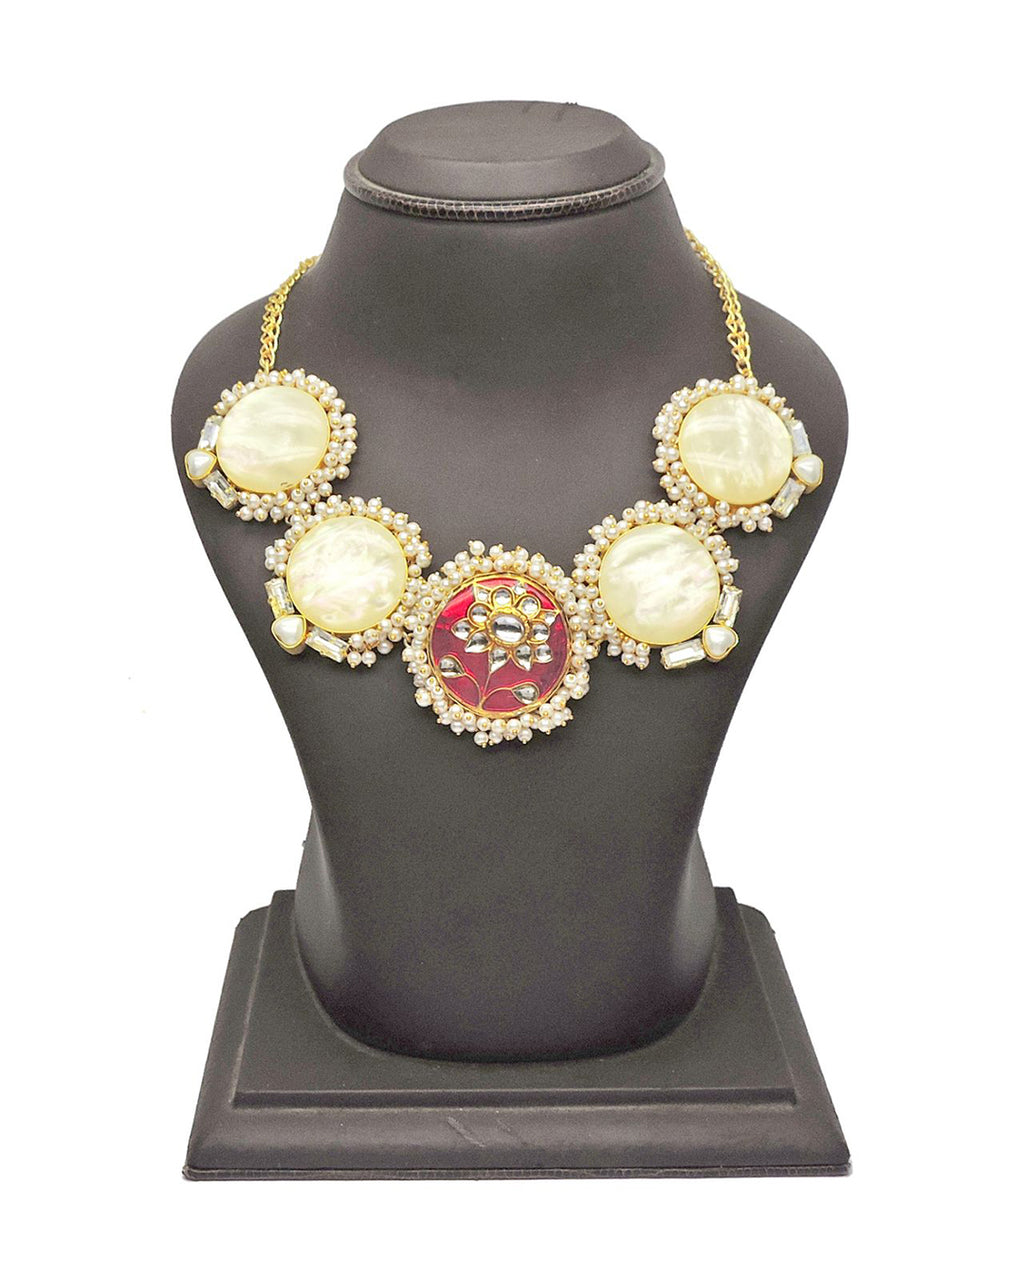 Adeline Necklace - Statement Necklaces - Gold-Plated & Hypoallergenic Jewellery - Made in India - Dubai Jewellery - Dori